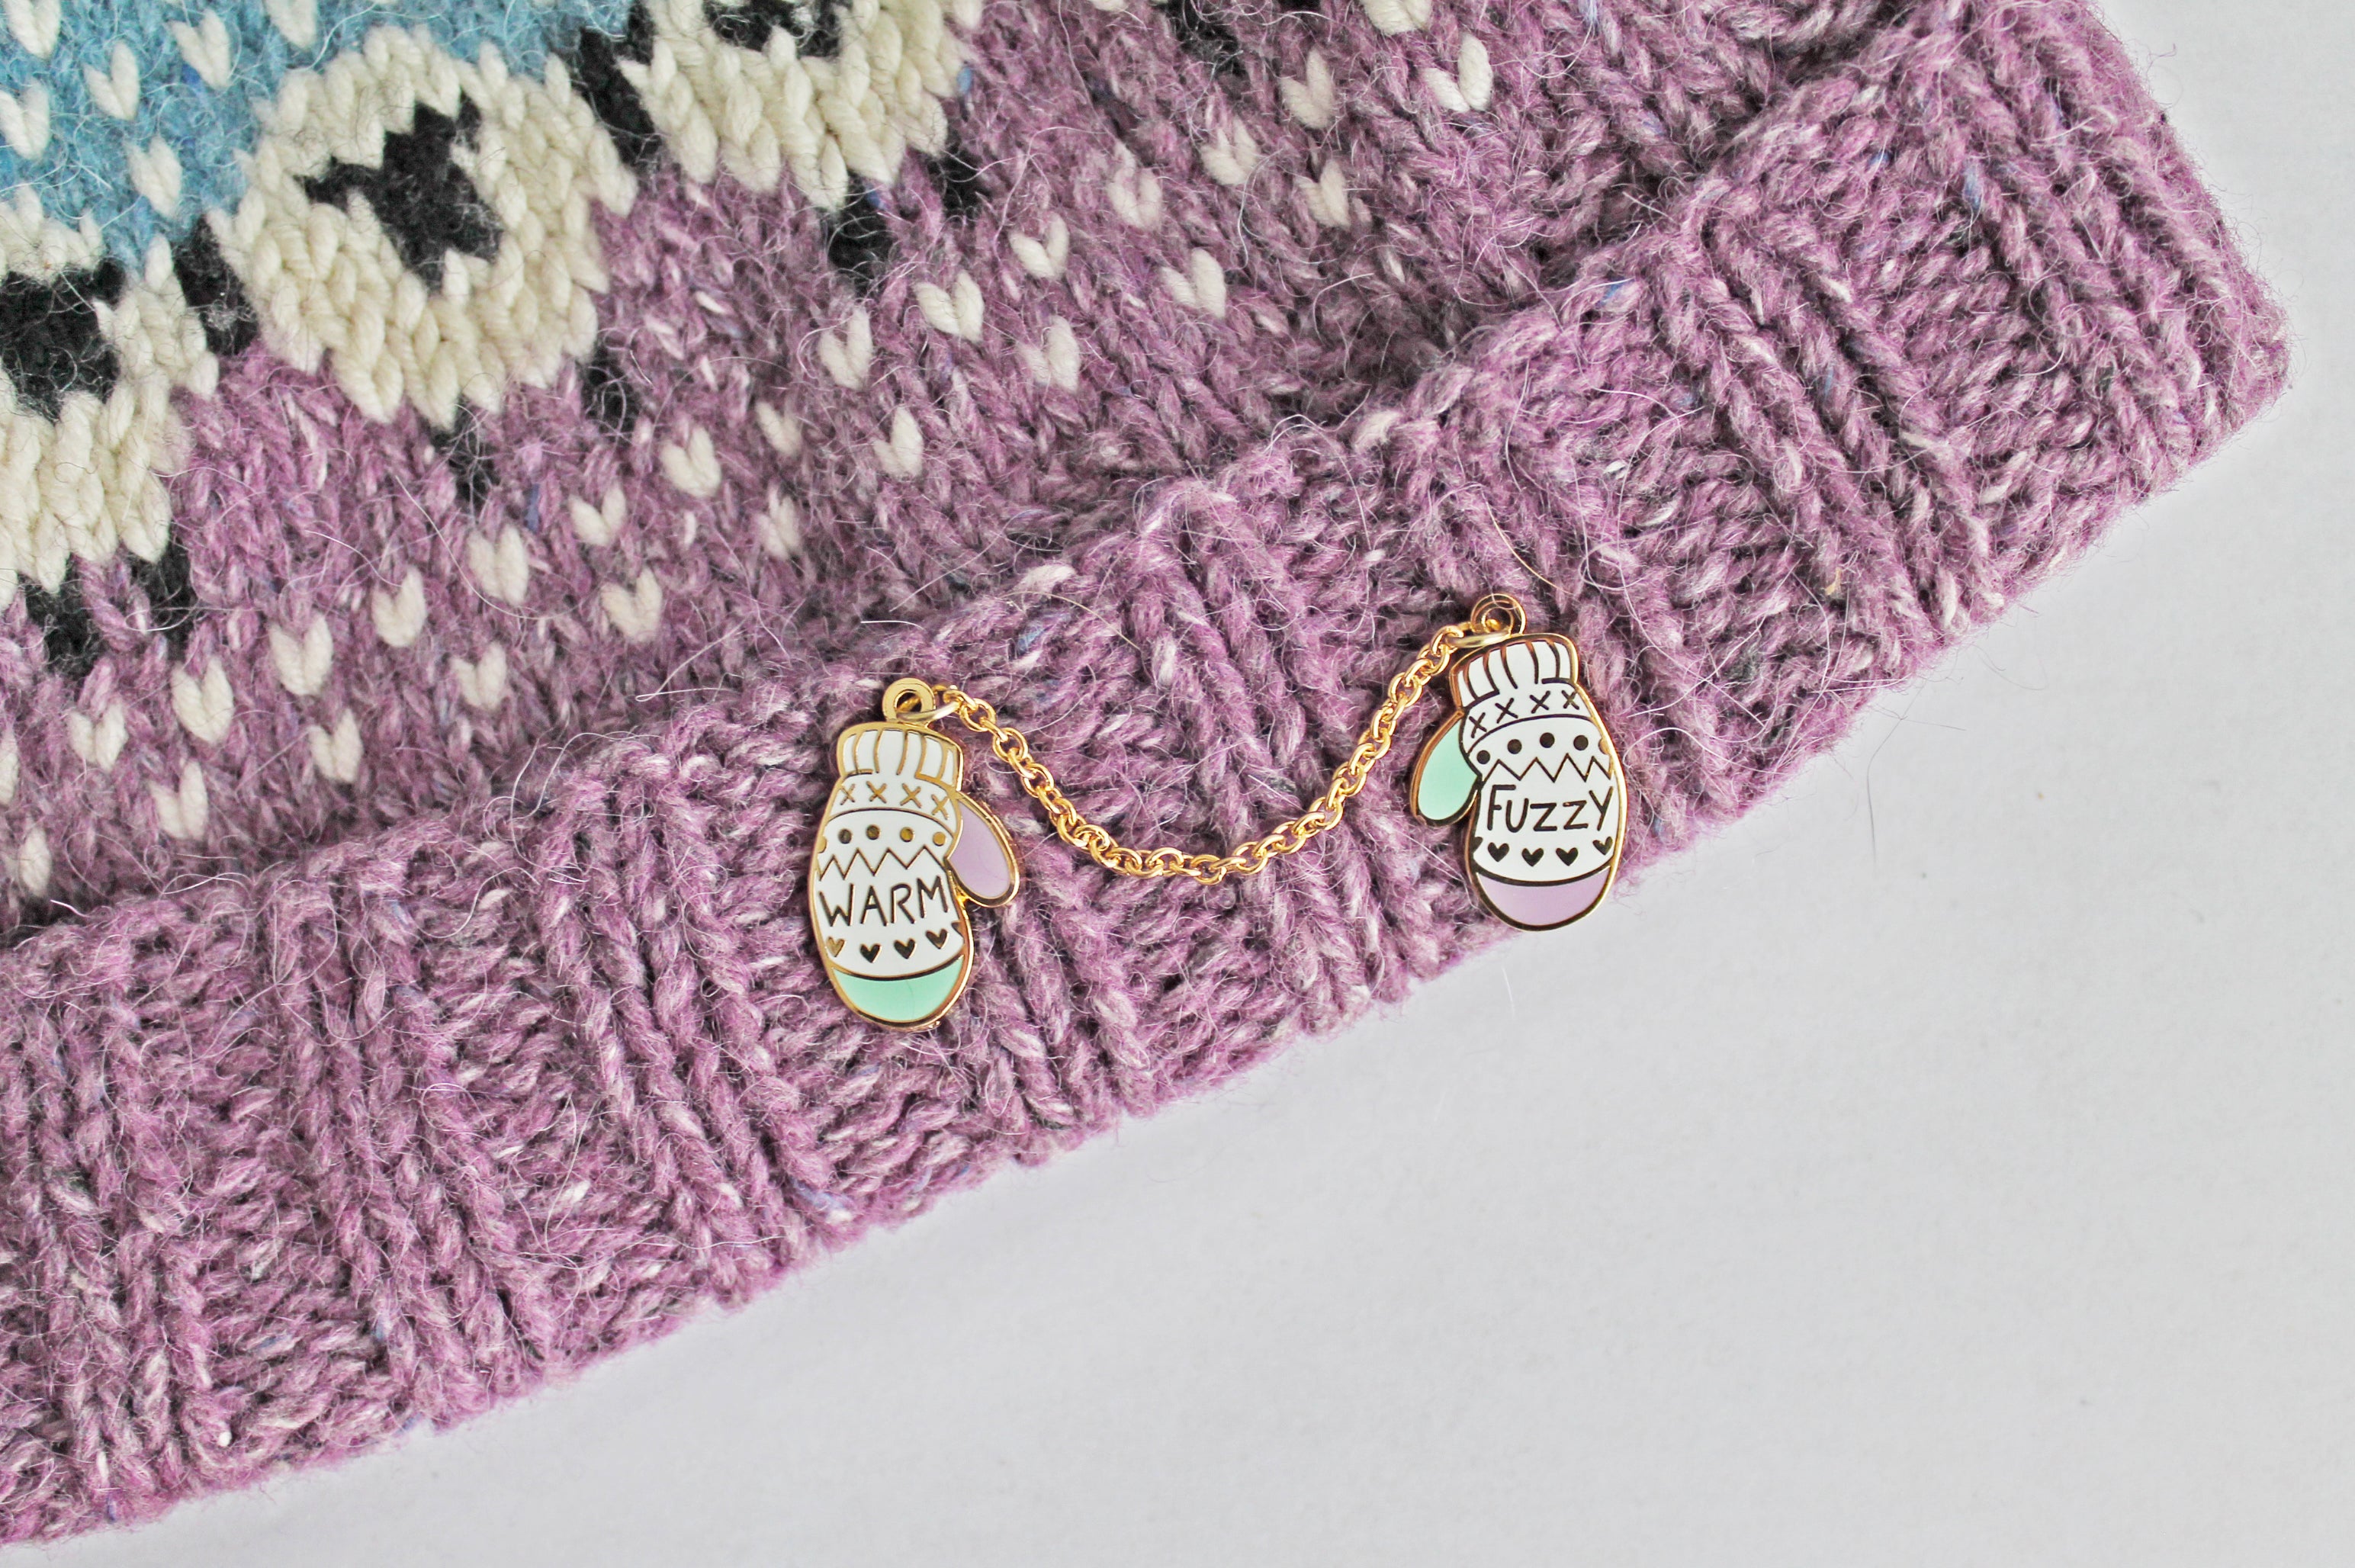 'Warm & Fuzzy' Mittens pin perfect for knitters and winter lovers. Unique enamel pin design, of two mittens attached by a chain.